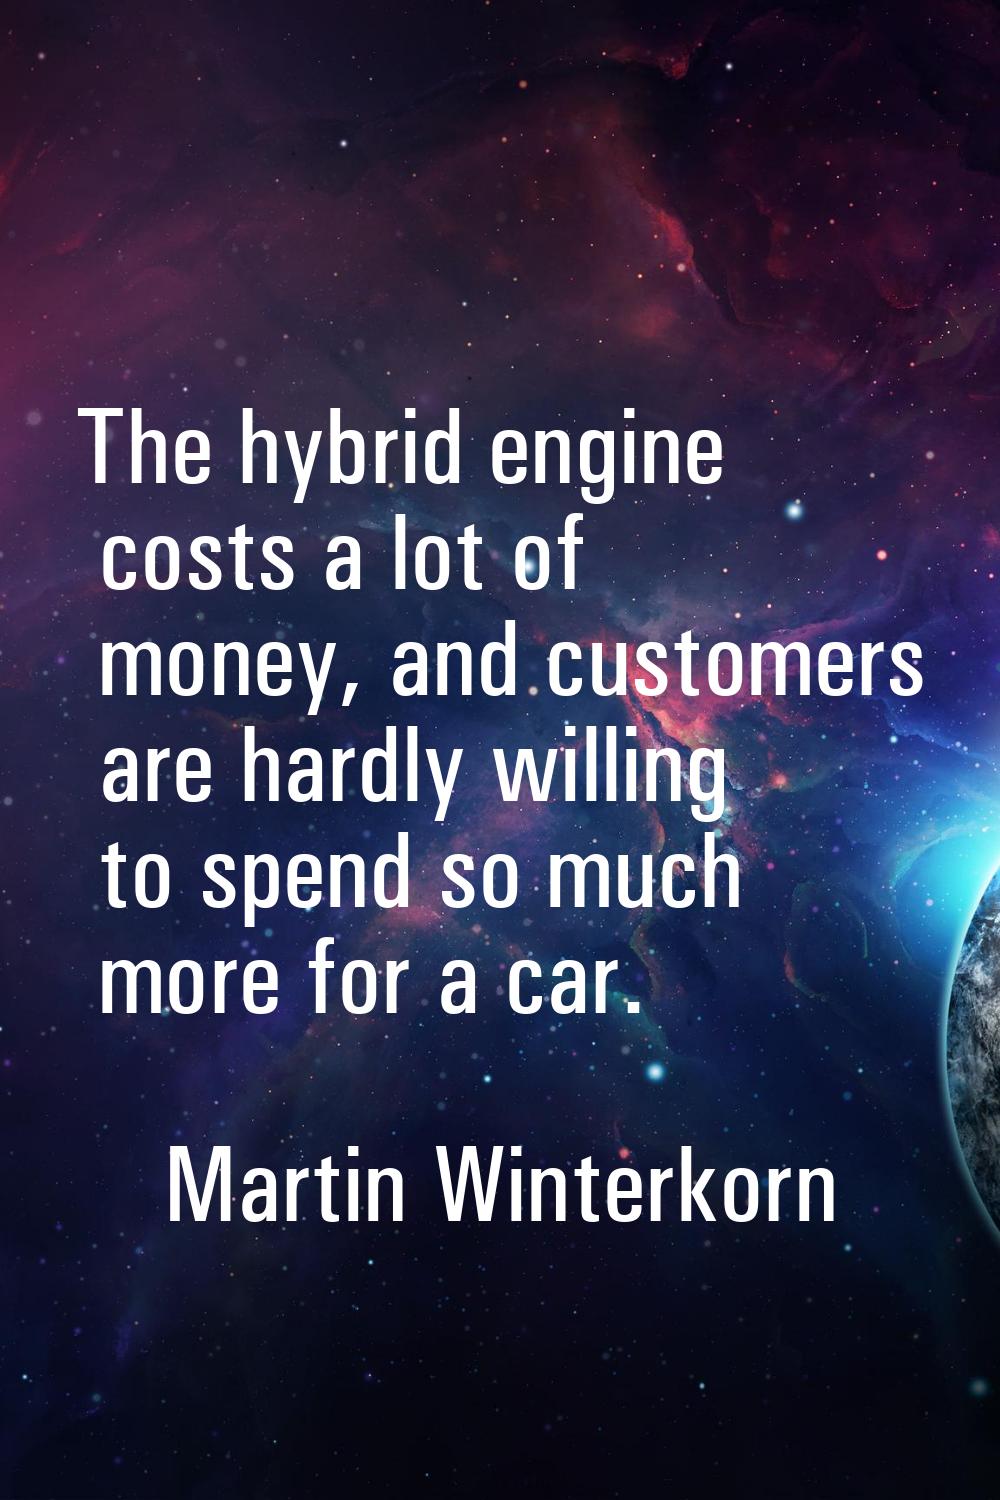 The hybrid engine costs a lot of money, and customers are hardly willing to spend so much more for 